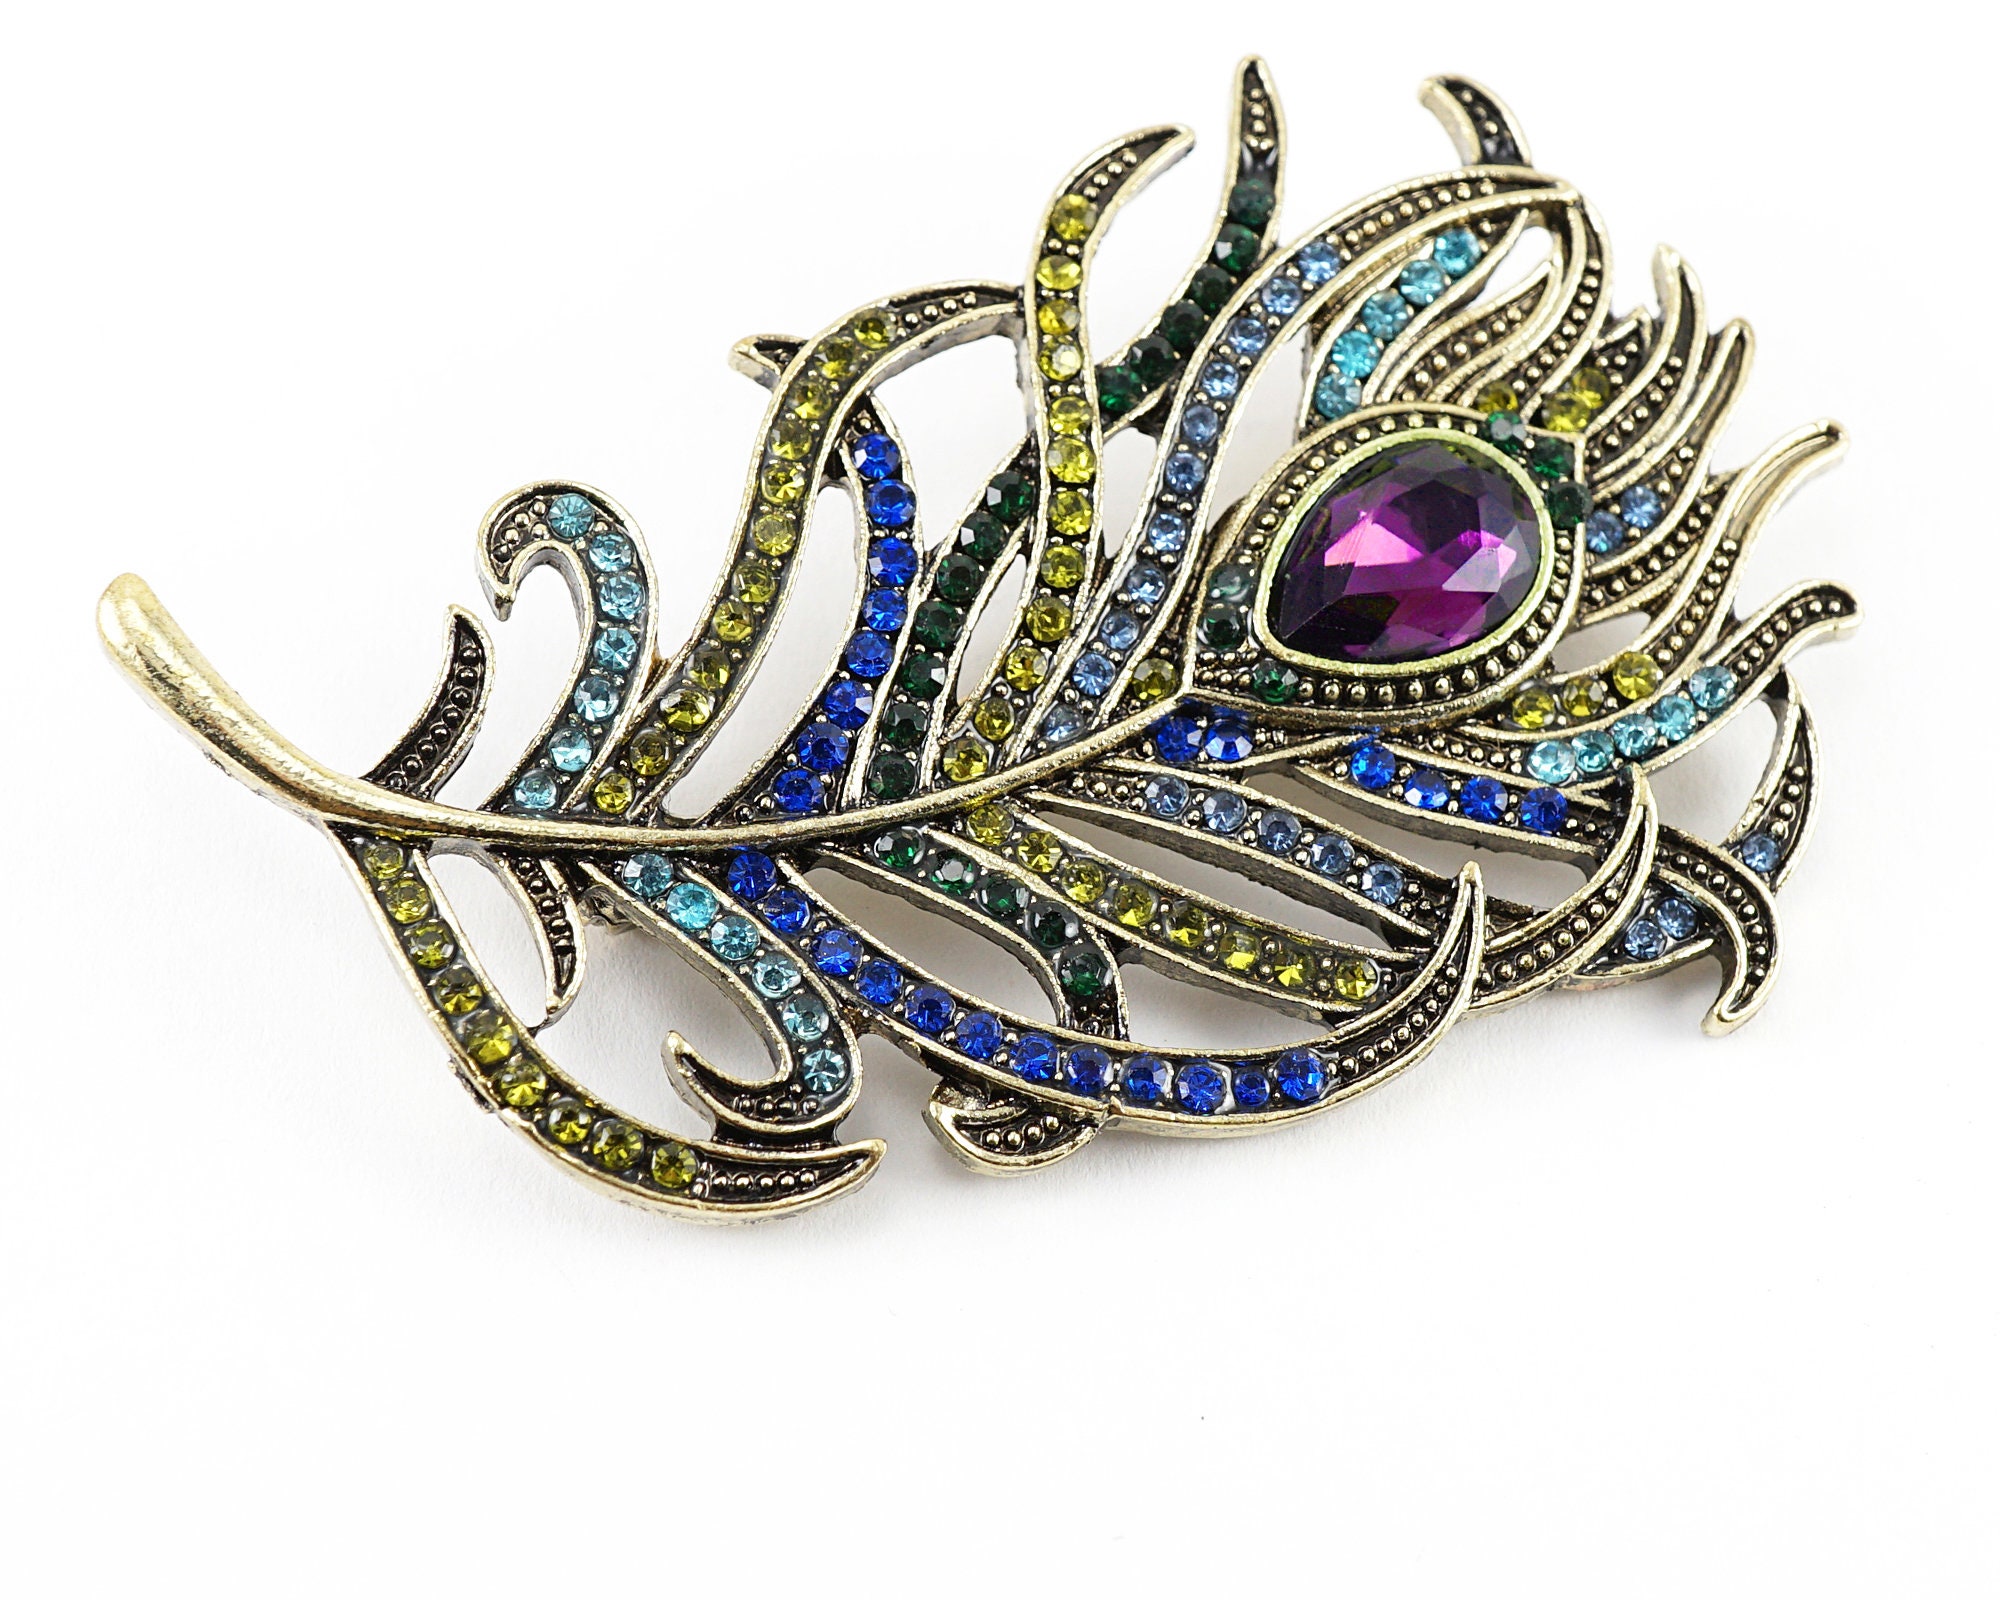 atVintage Stunning Peacock Feather Brooch Pin, Purple Teardrop Crystal, Colorful Blue Green Tiny Rhinestones Valentine's Day Gift